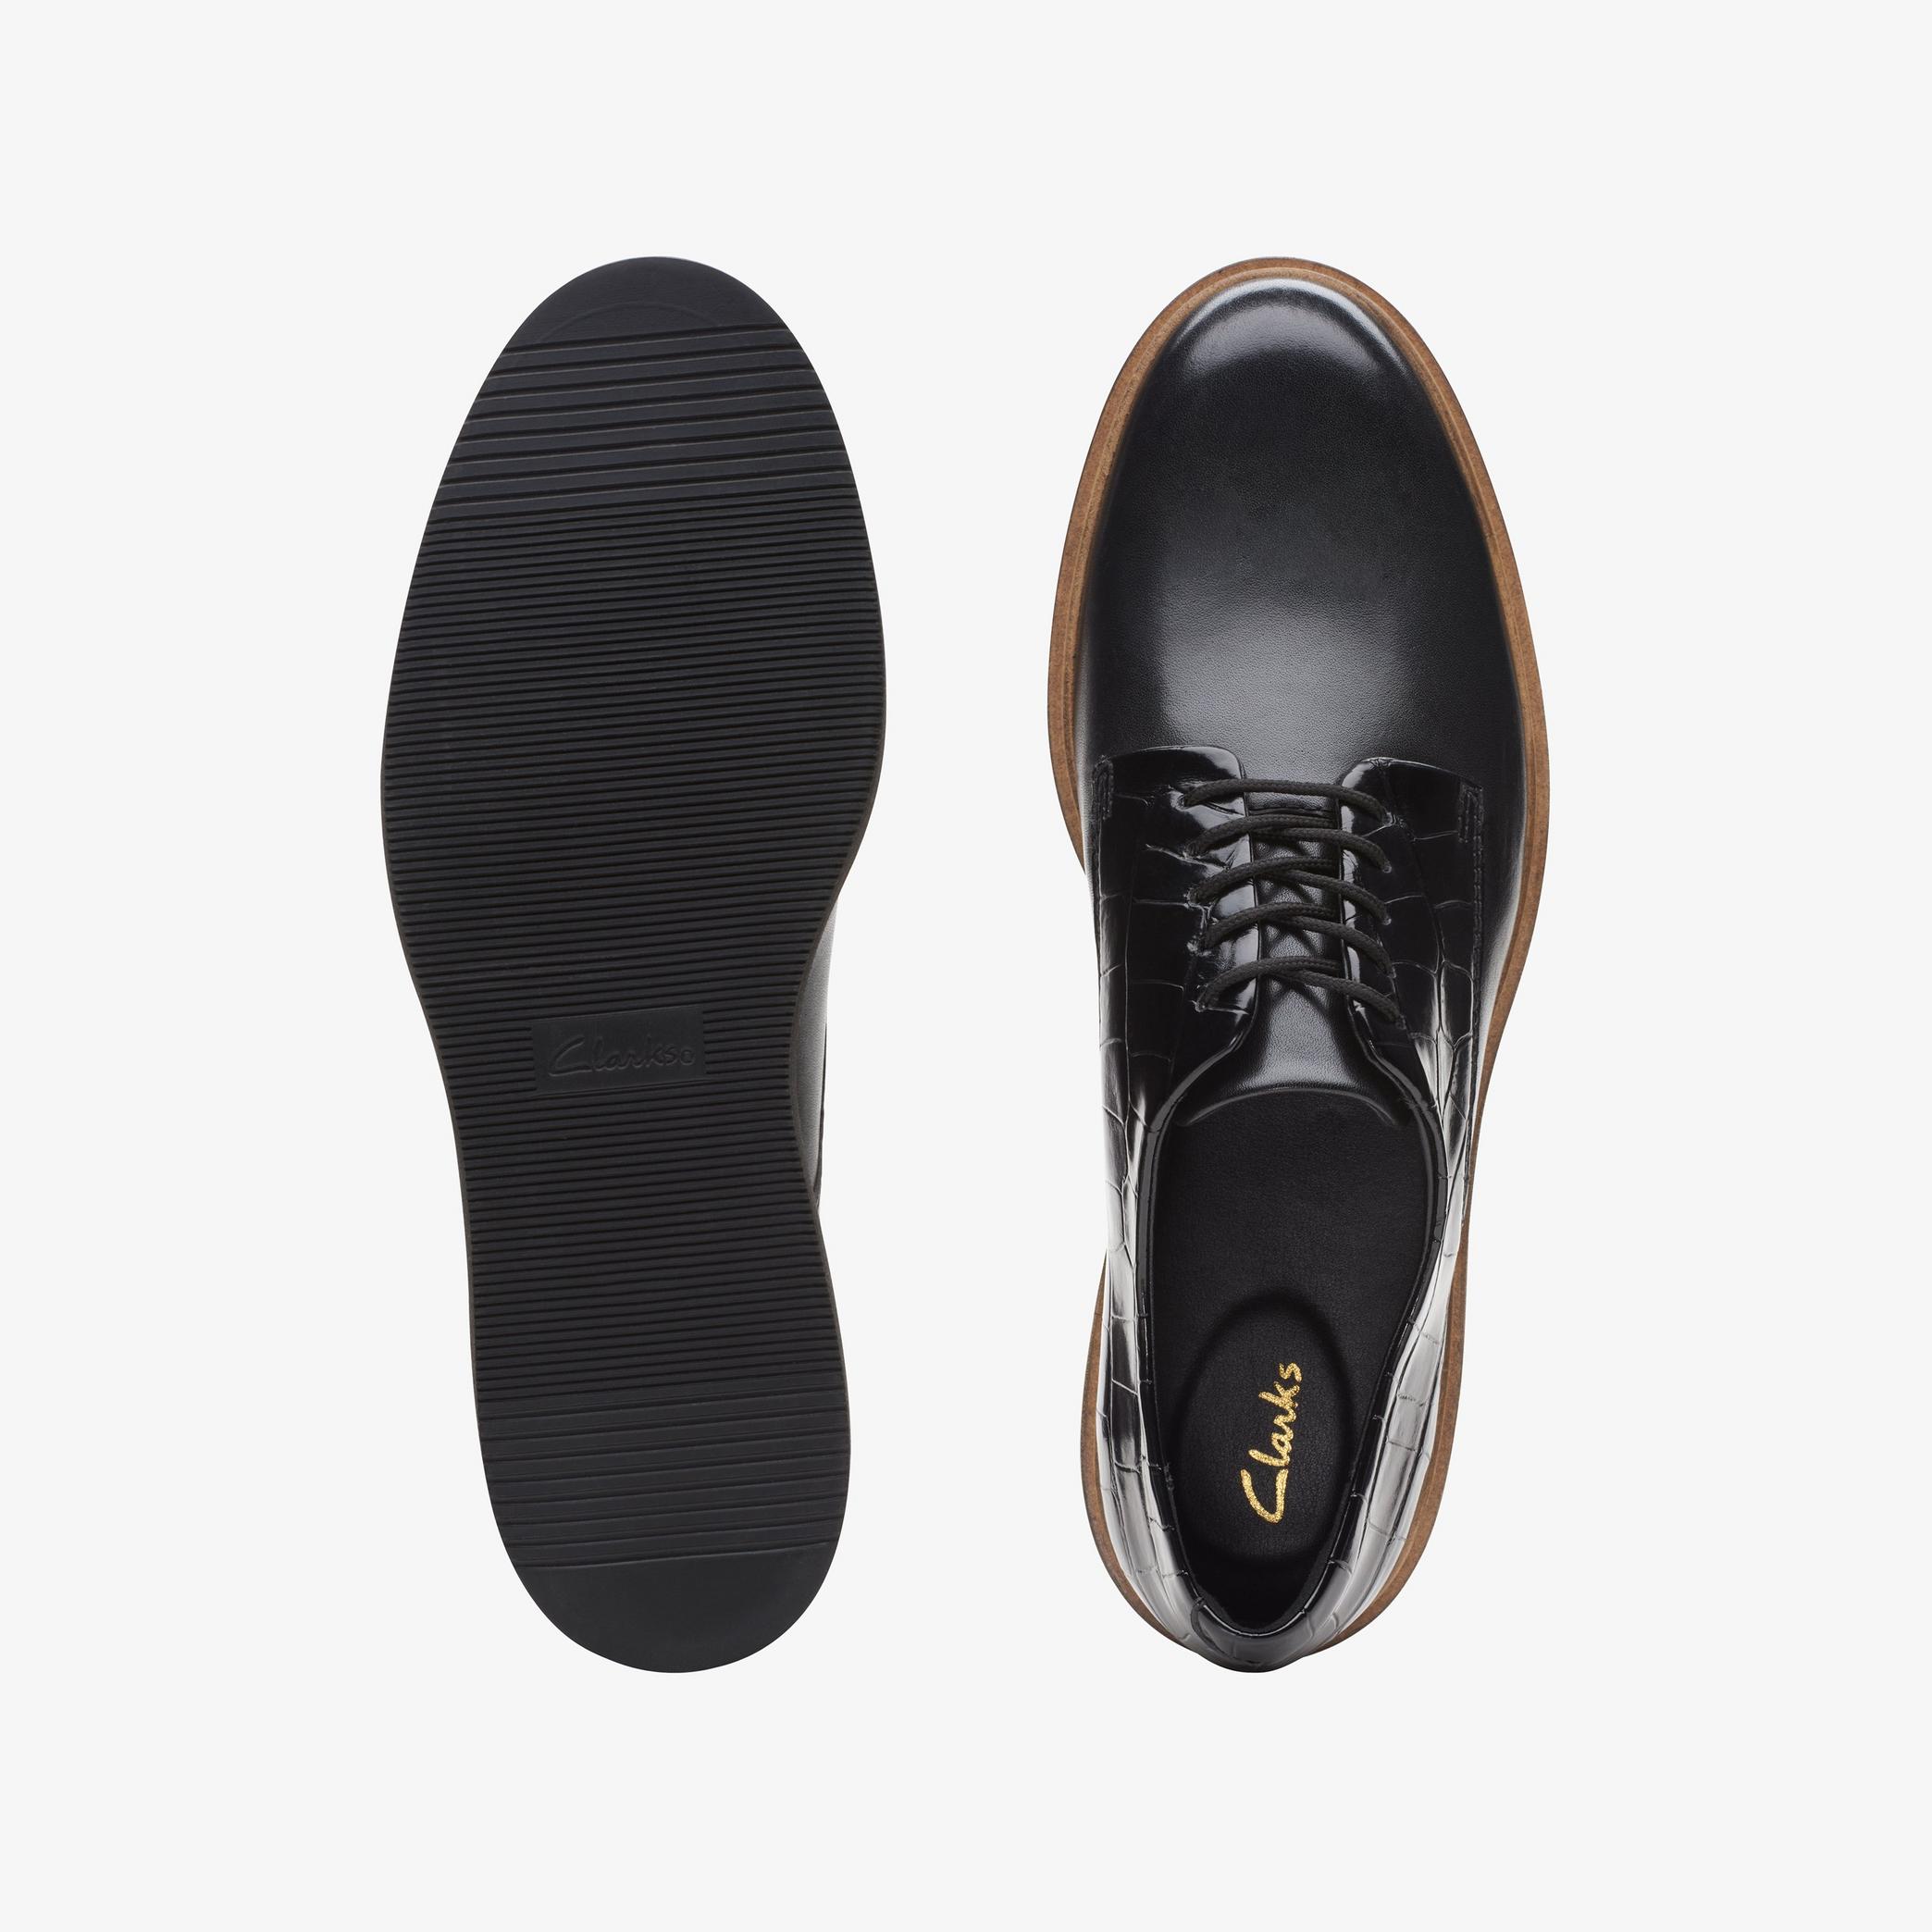 Glickly Derby Black Combination Derby Shoe, view 6 of 6